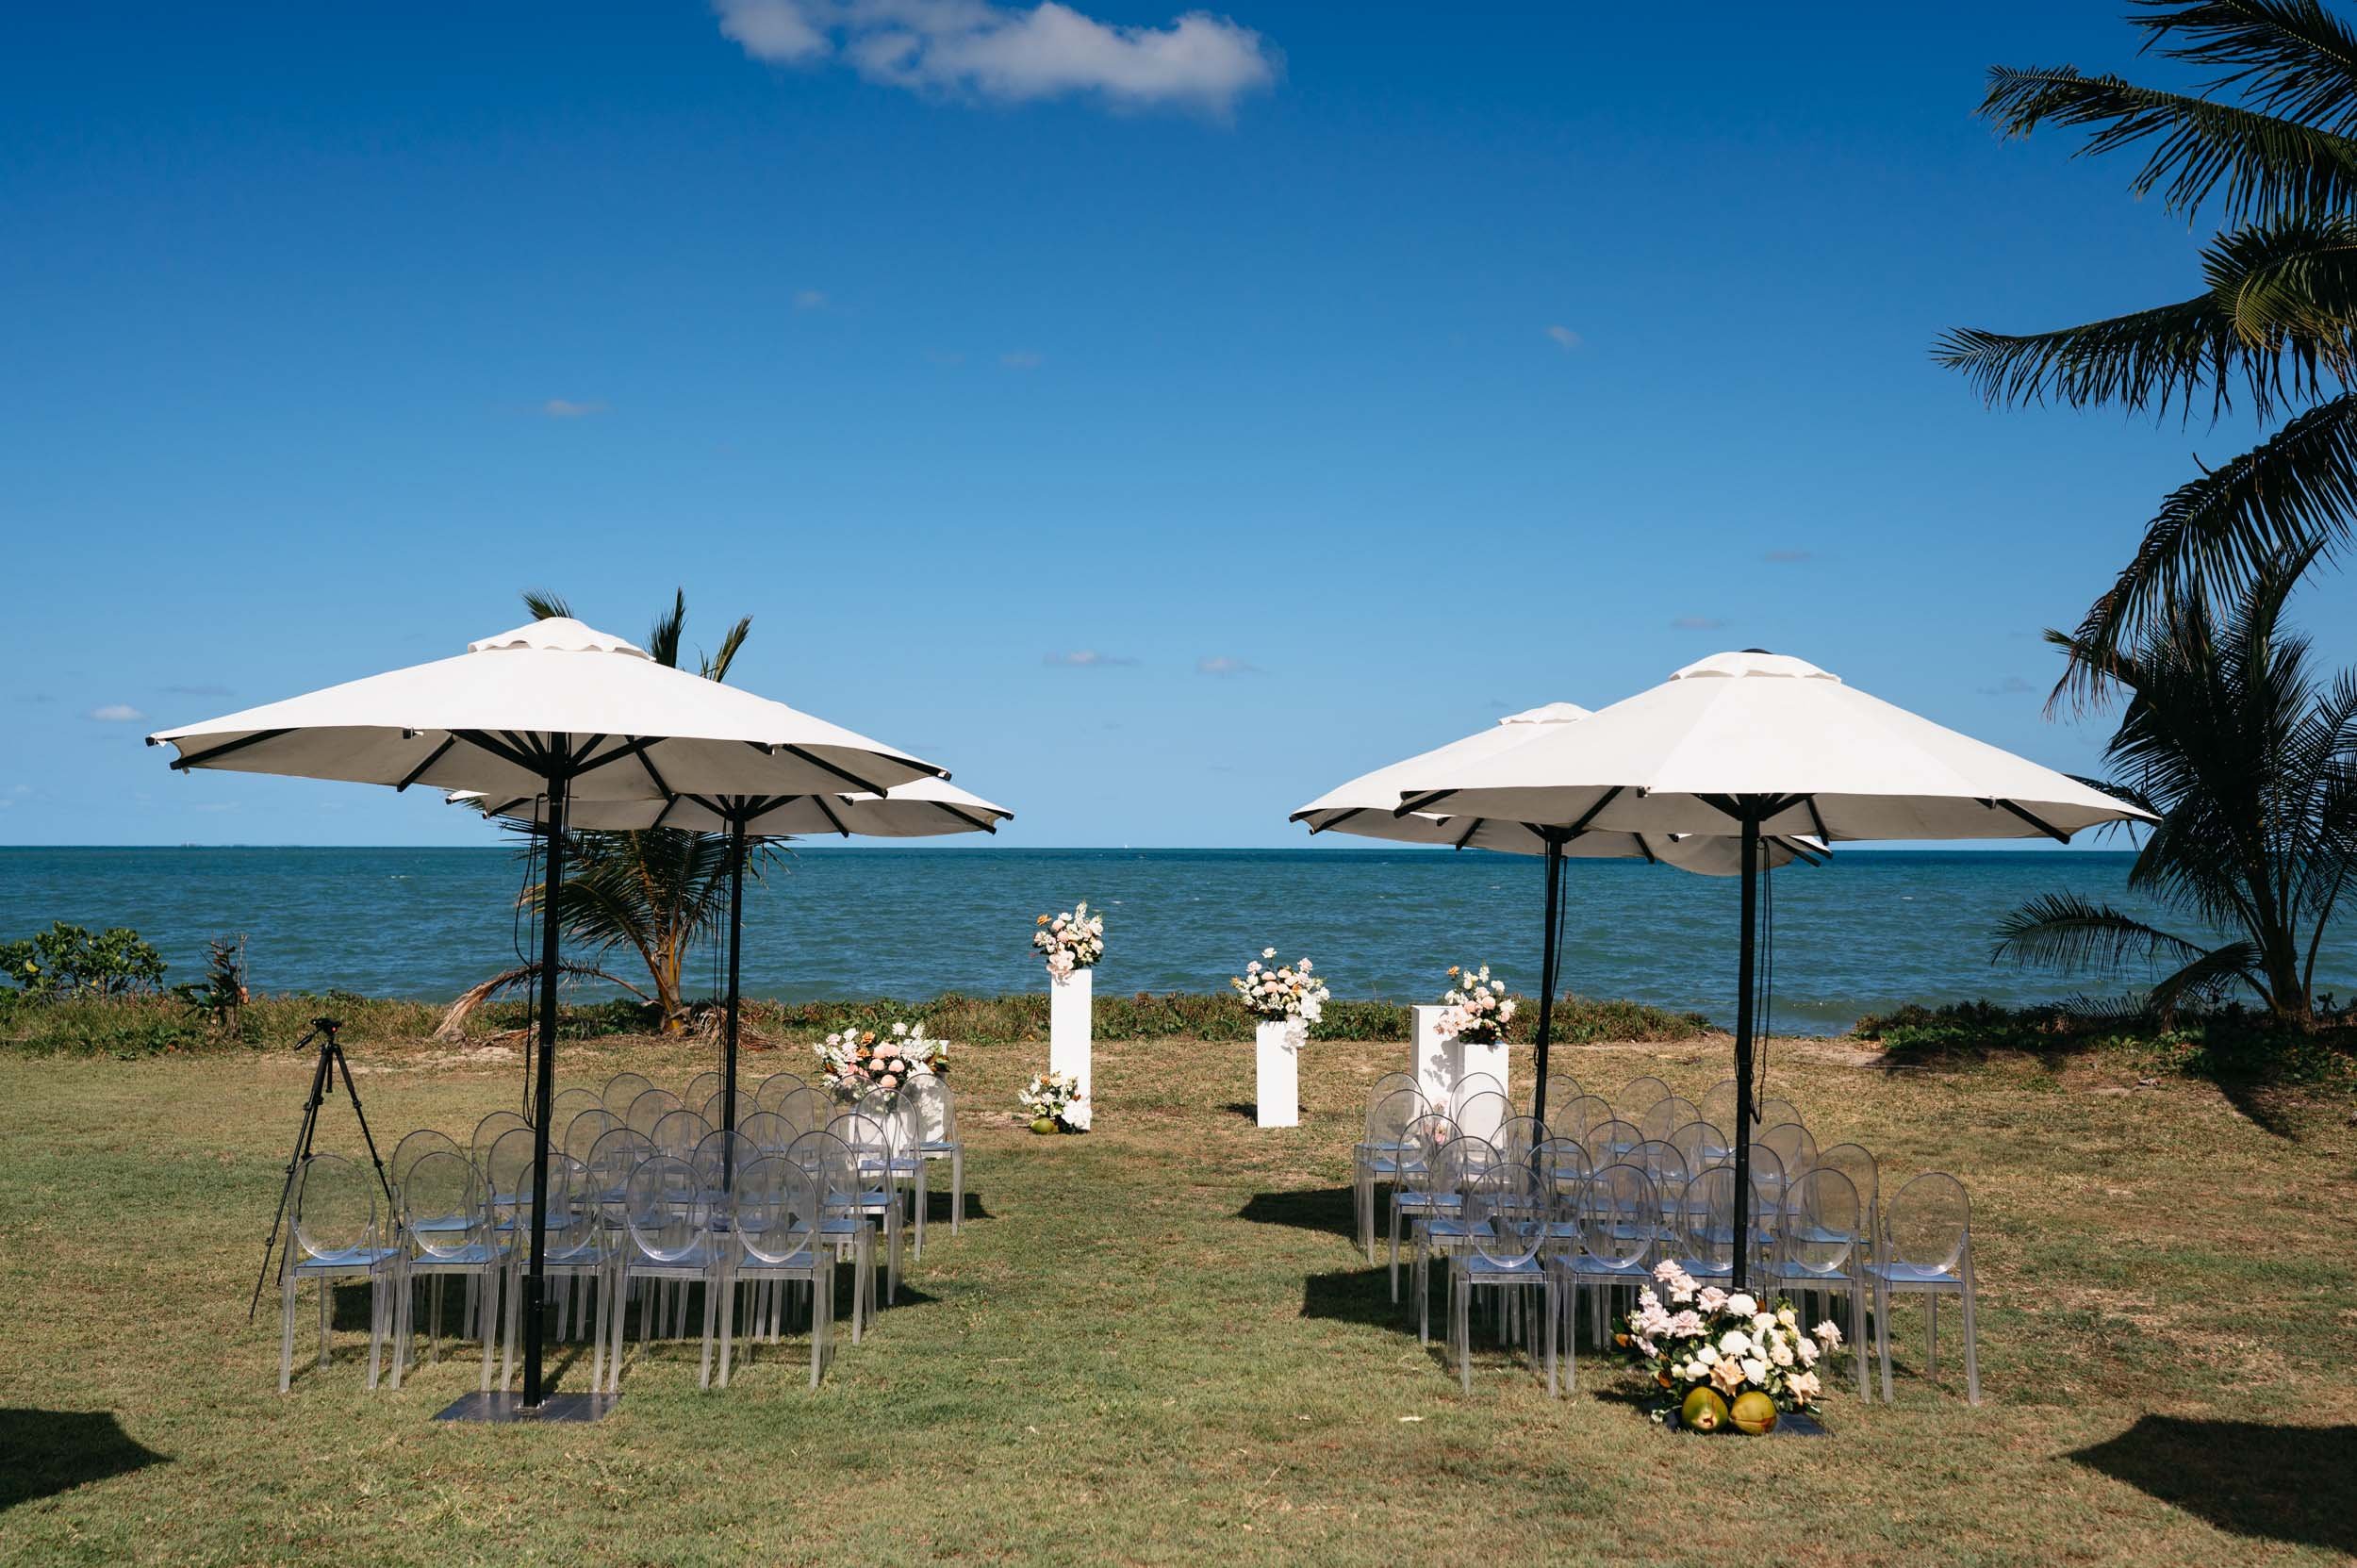 The Raw Photographer - Cairns Wedding Photographer - Port Douglas ceremony venues and locations.jpg